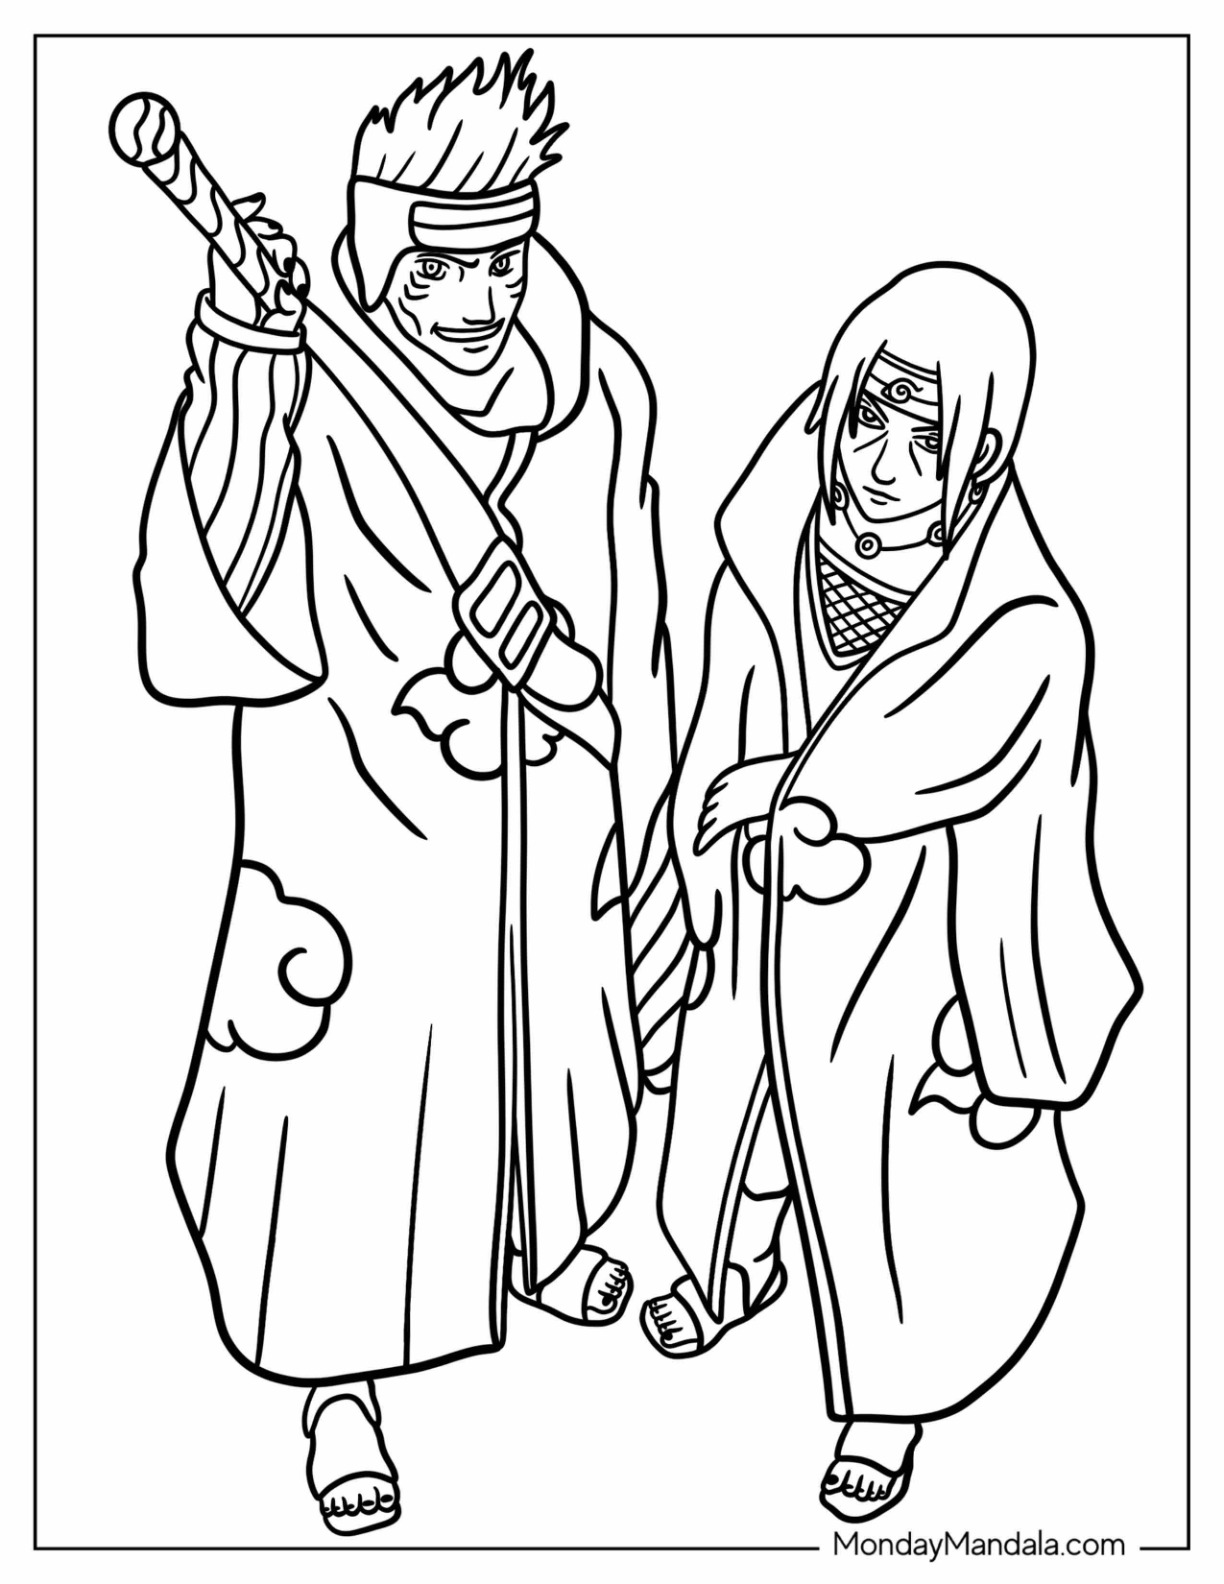 Itachi coloring pages free pdf printables